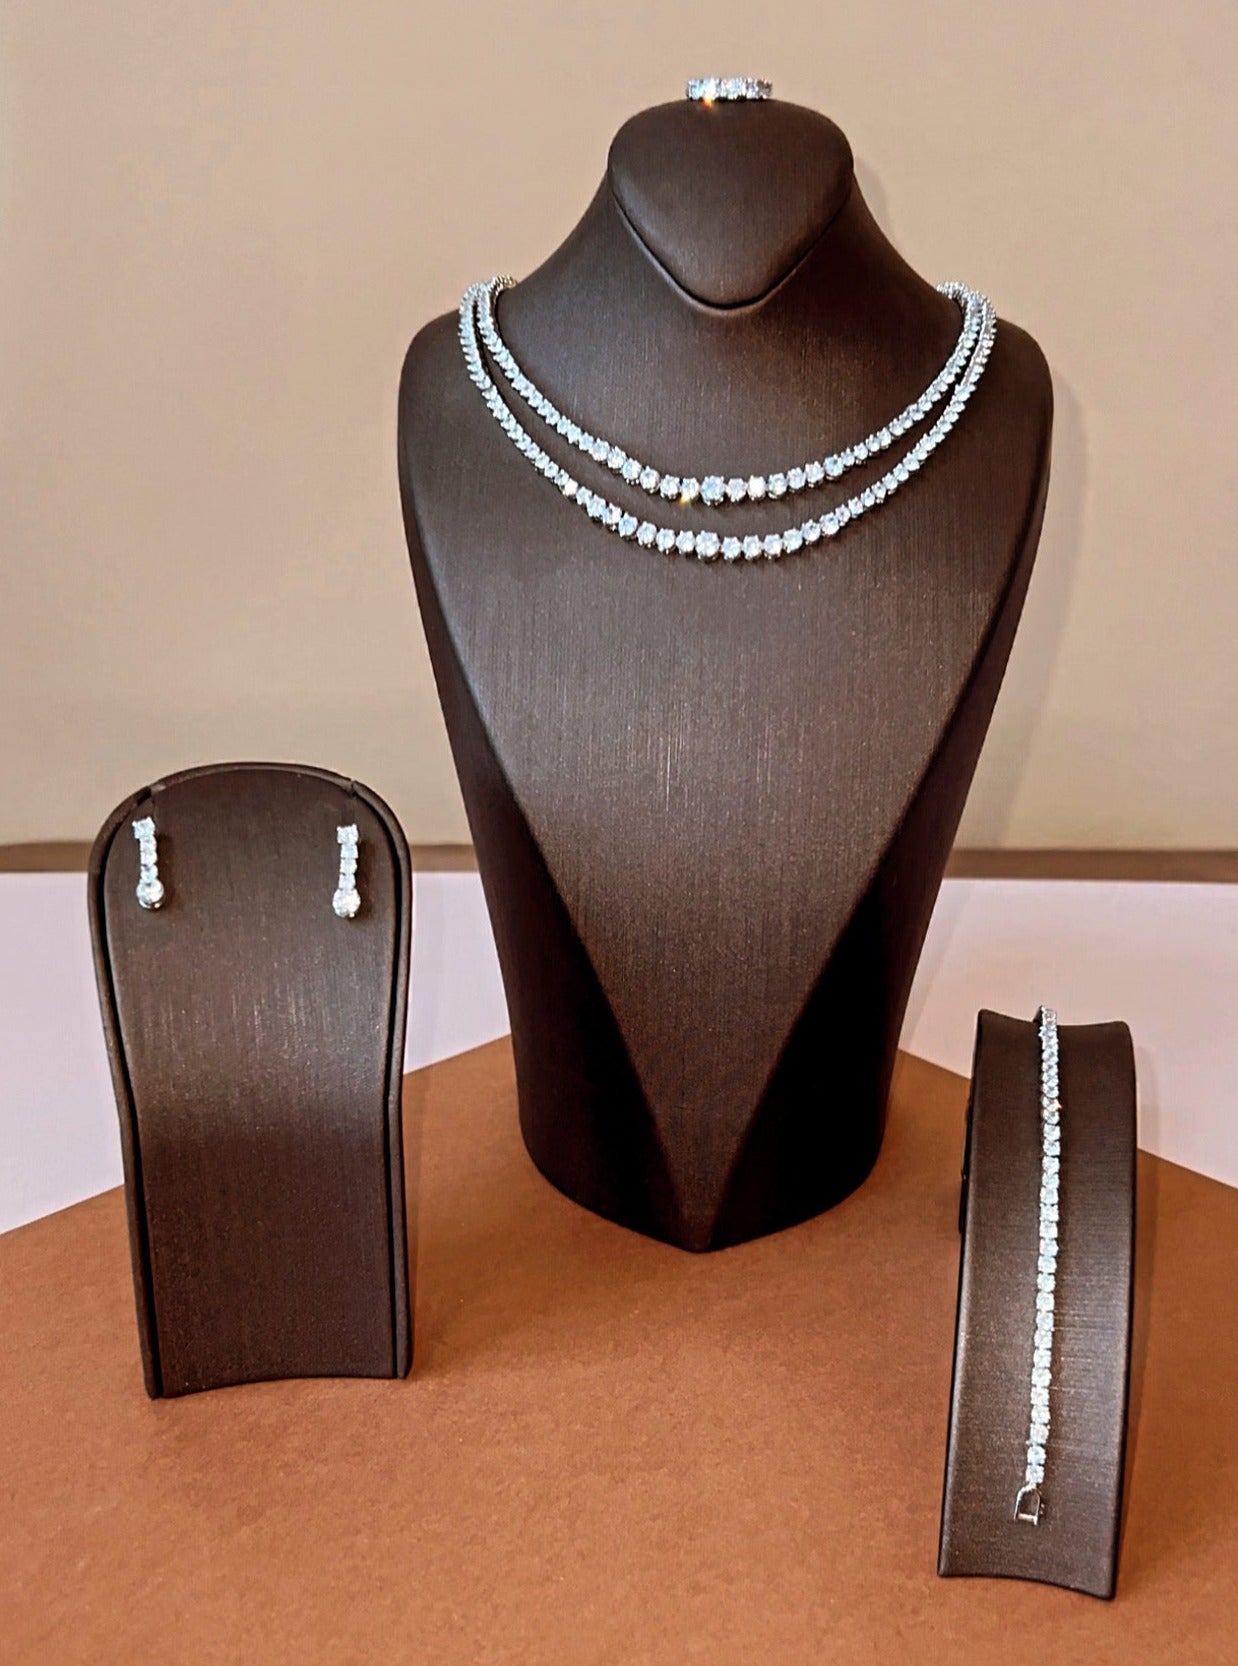 TANDRA Swarovski Jewelry Set with Necklace, Bracelet, Earrings and Ring